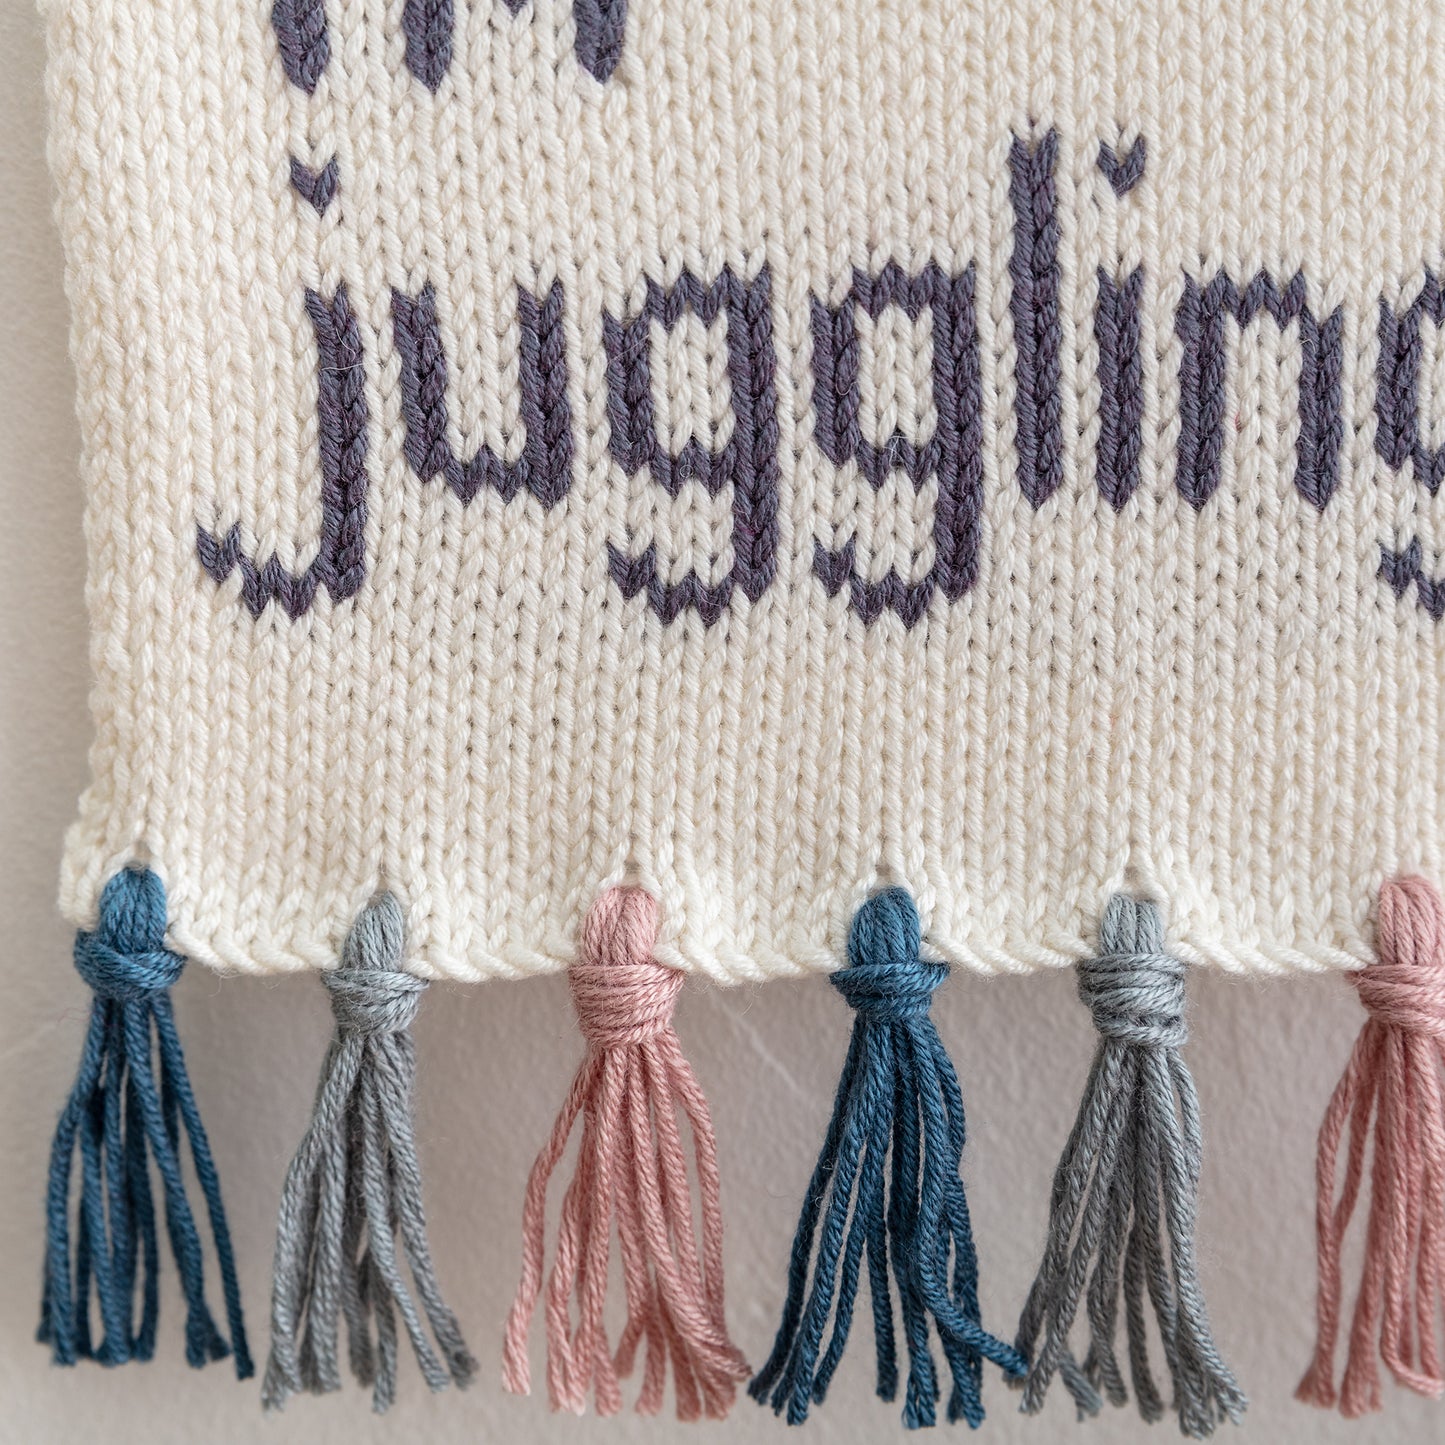 Everyday I'm juggling knitted wall hanging